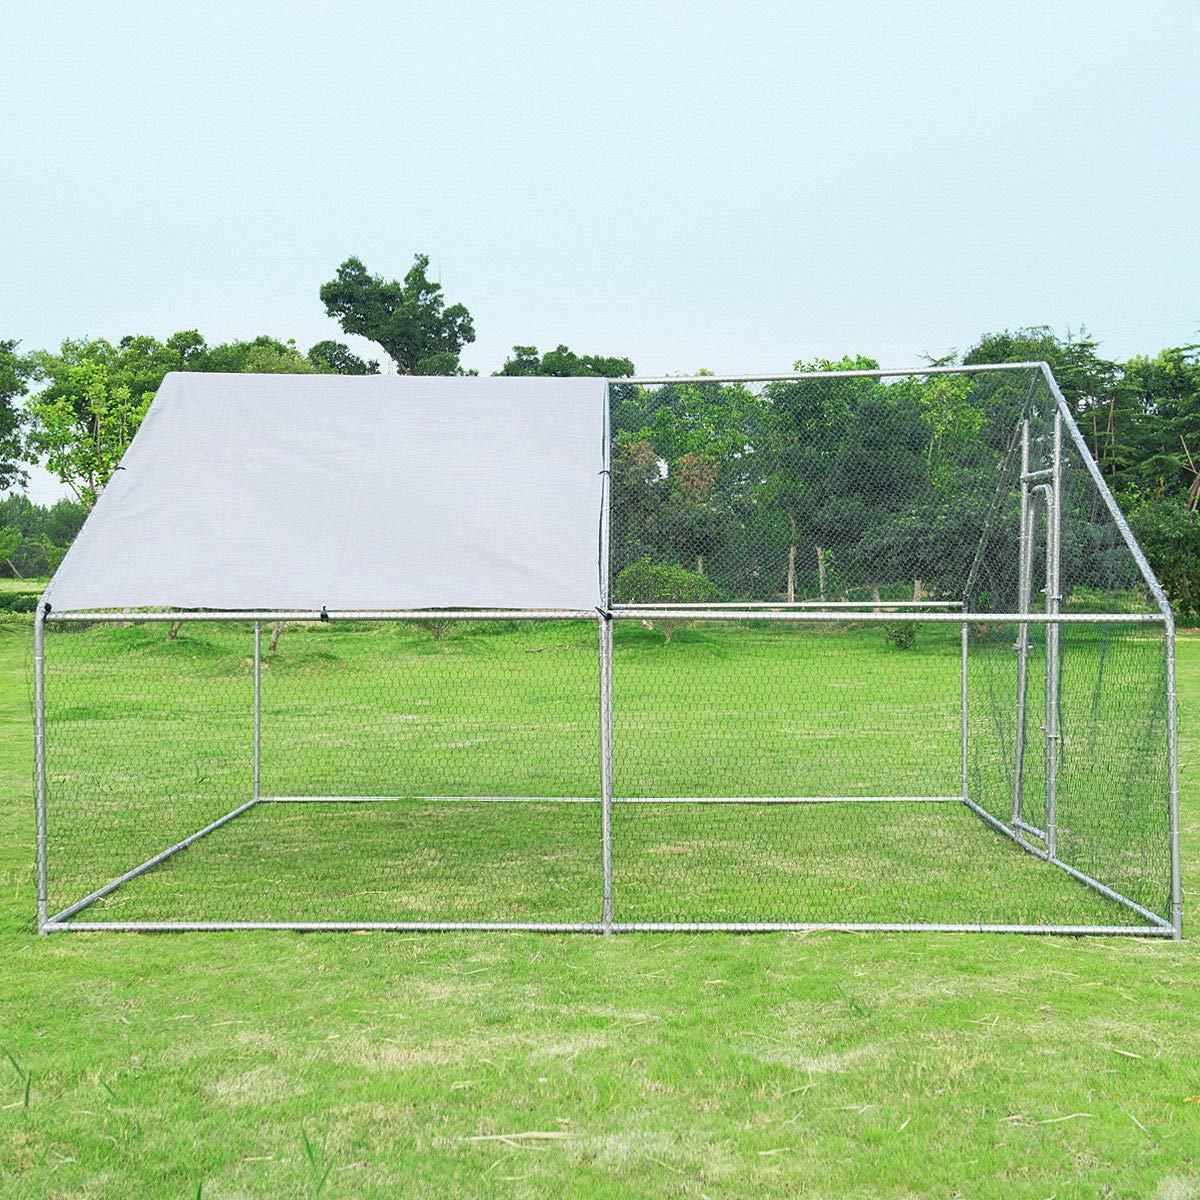 Giantex Large Metal Chicken Coop Walk-in Chicken Coops Run House Shade Cage with Waterproof and Anti-Ultraviolet Cover